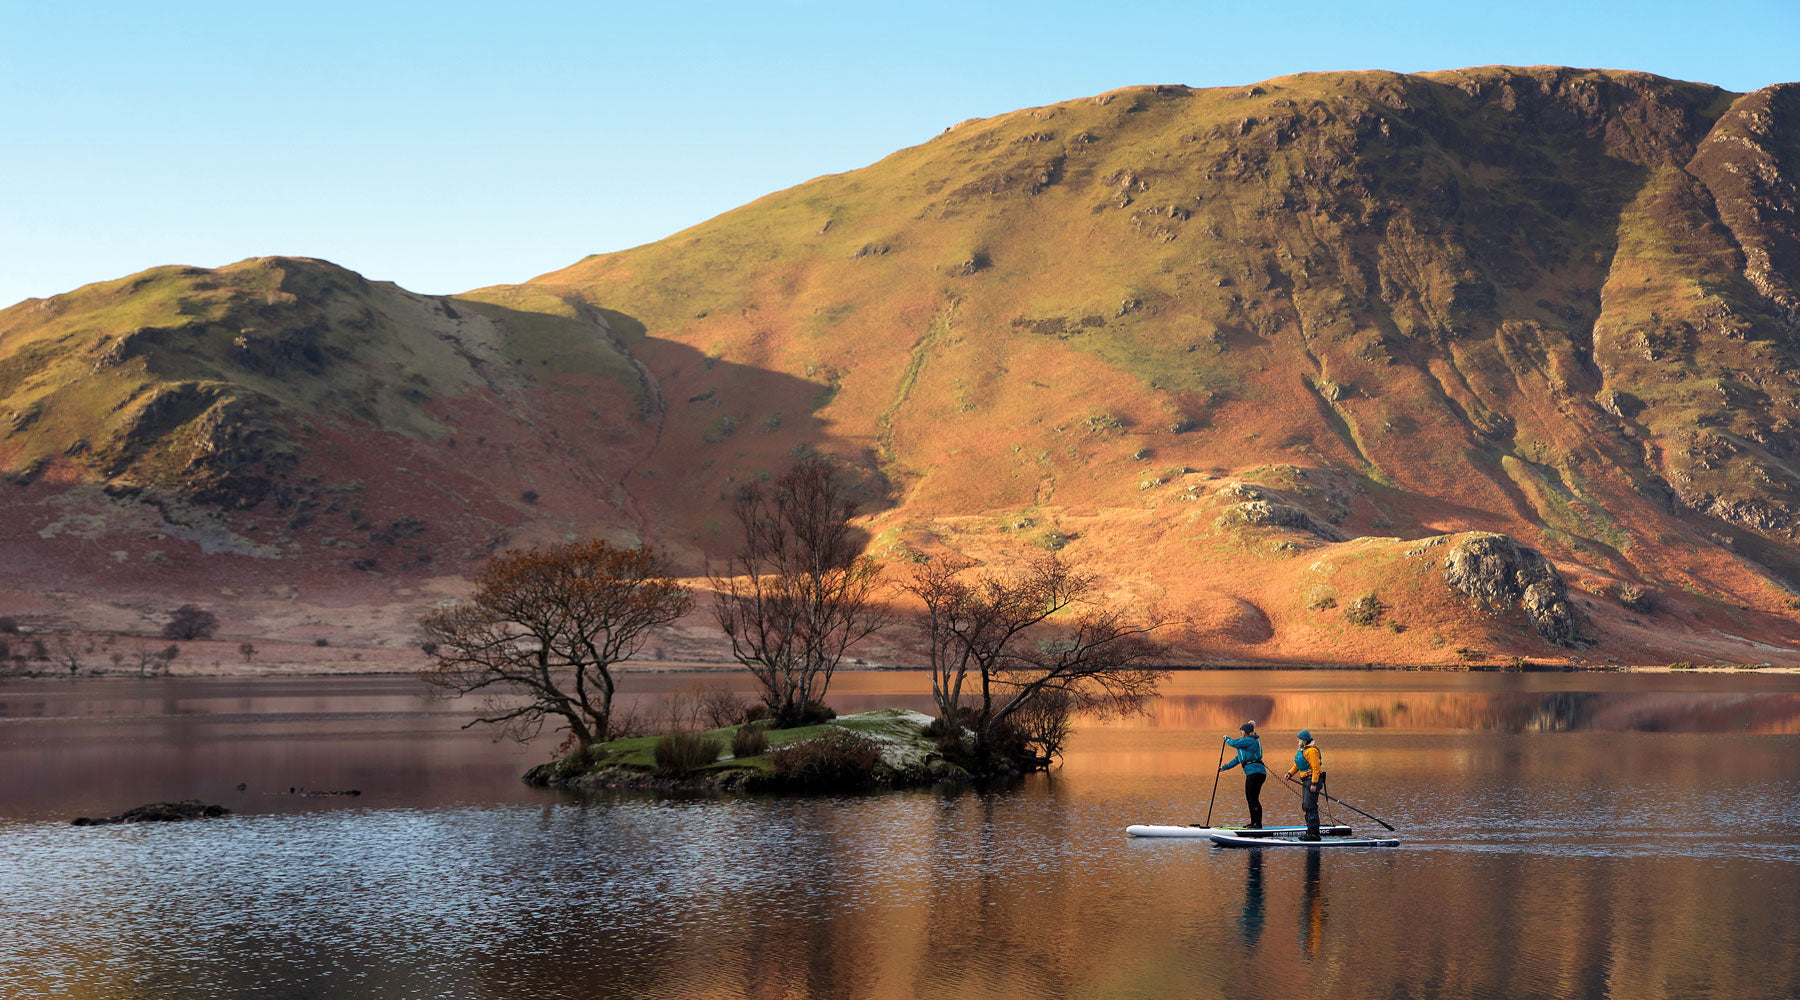 Photo from Stand-up Paddleboarding in the Lake District by Jo Moseley. Photo by Jumpy James